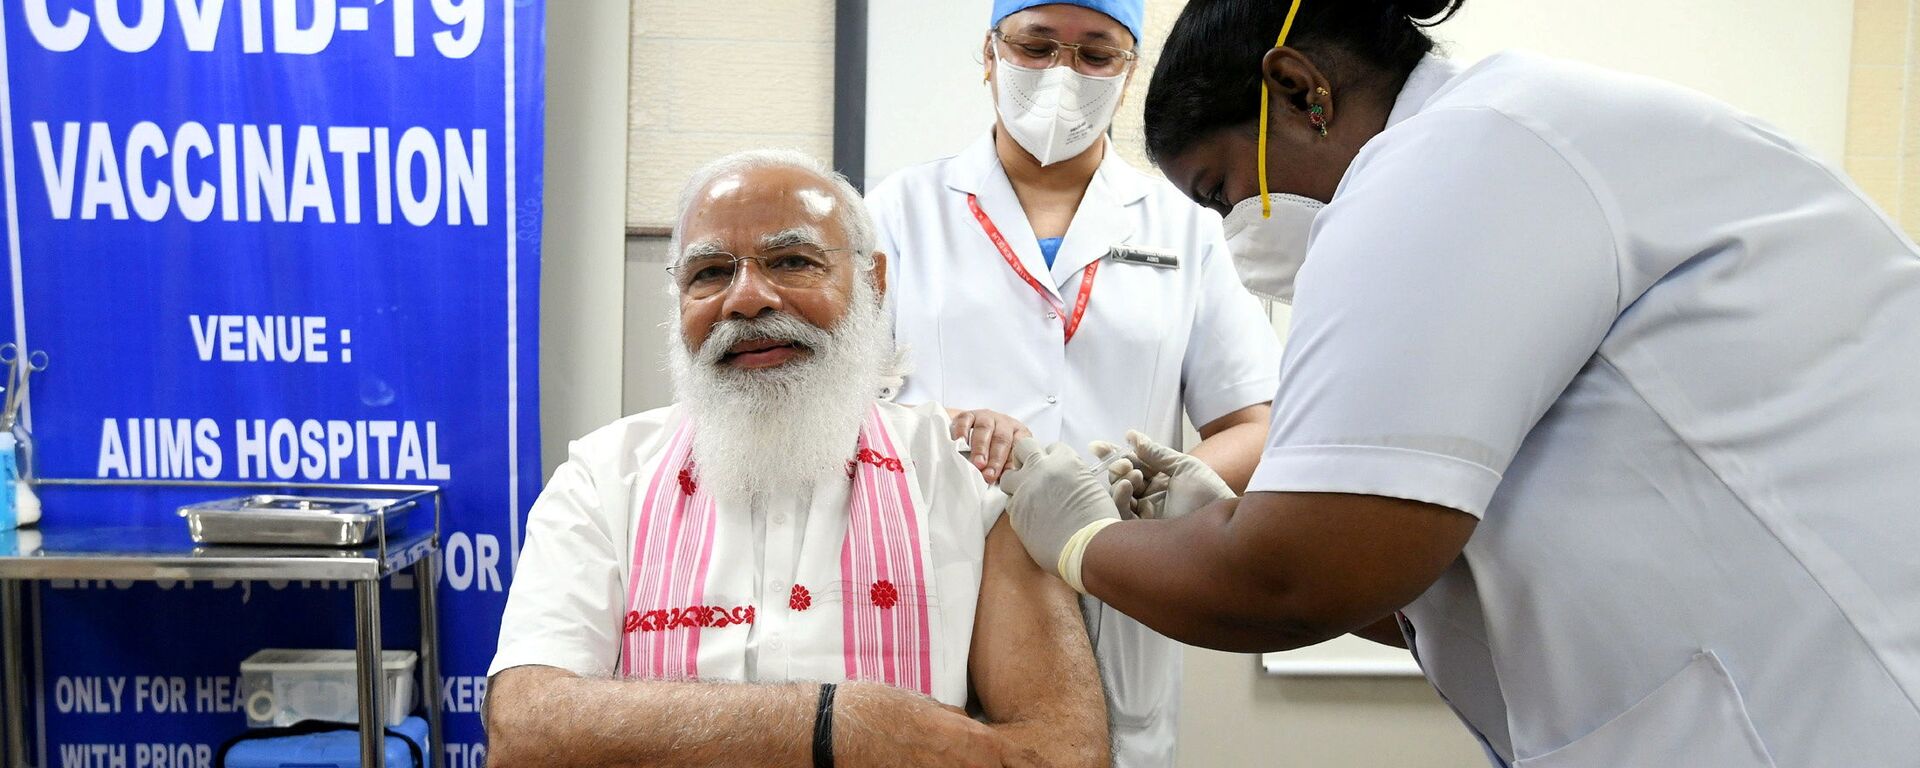 India's Prime Minister Narendra Modi receives a dose of COVAXIN, a coronavirus disease (COVID-19) vaccine developed by India's Bharat Biotech and the state-run Indian Council of Medical Research, at All India Institute of Medical Sciences (AIIMS) hospital in New Delhi, India, March 1, 2021 - Sputnik International, 1920, 11.03.2021